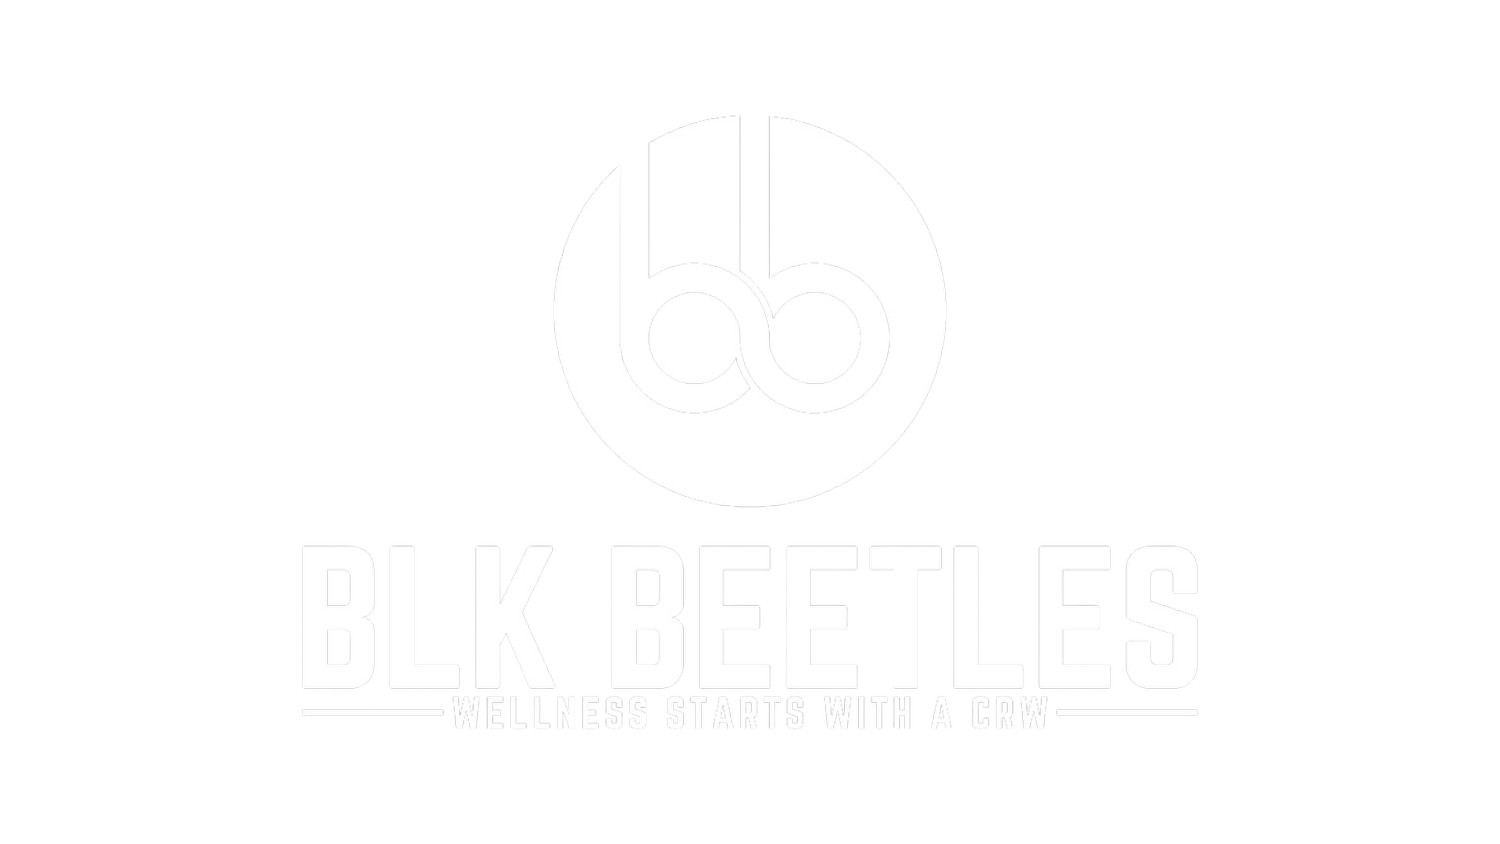 BLK Beetles - Wellness Starts with a CRW